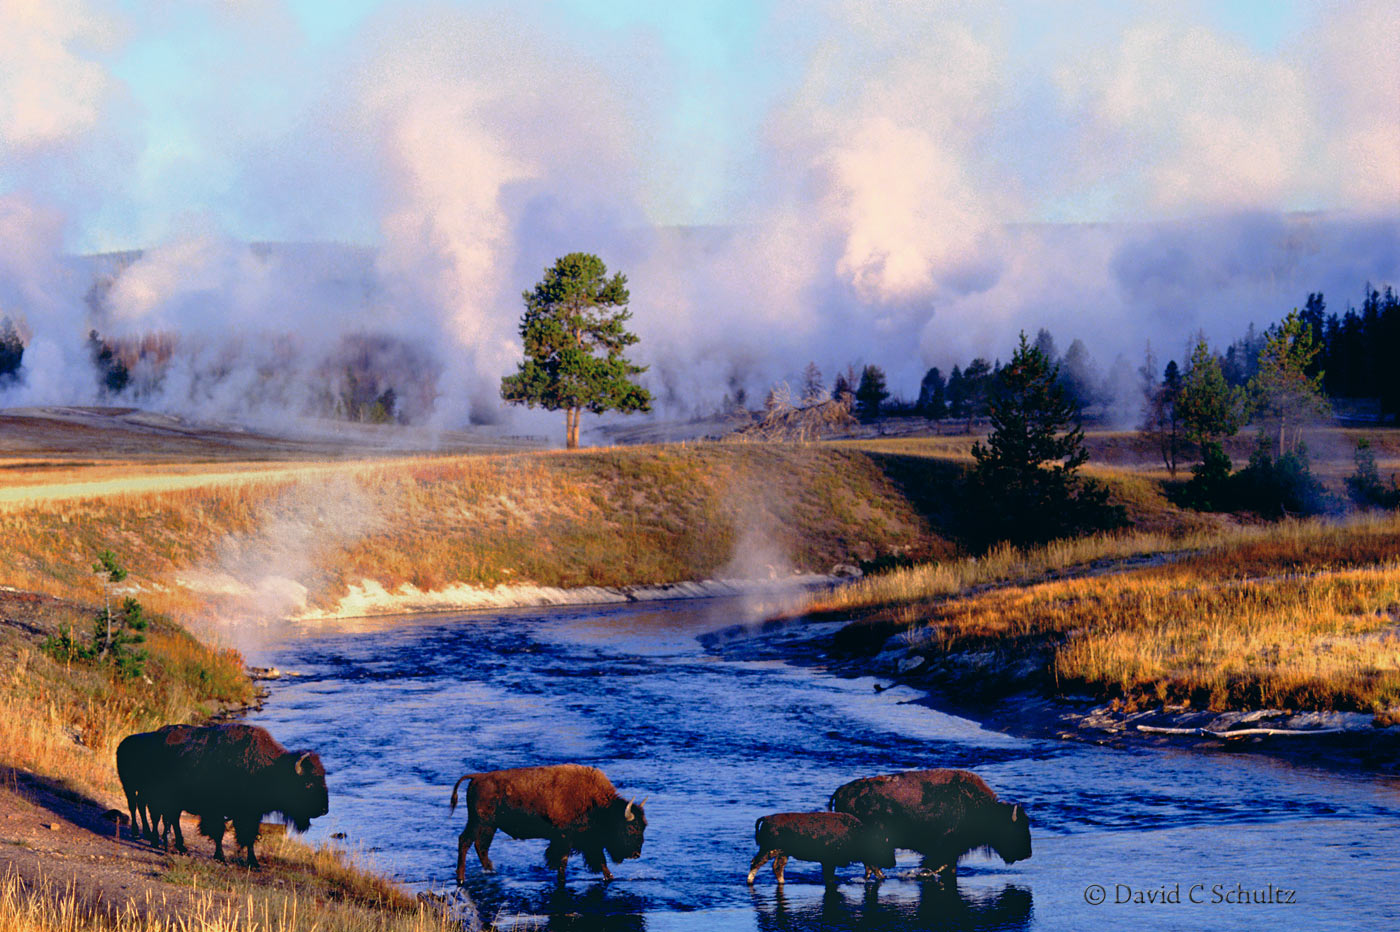 Bison in Yellowstone National Park - Image #106-170